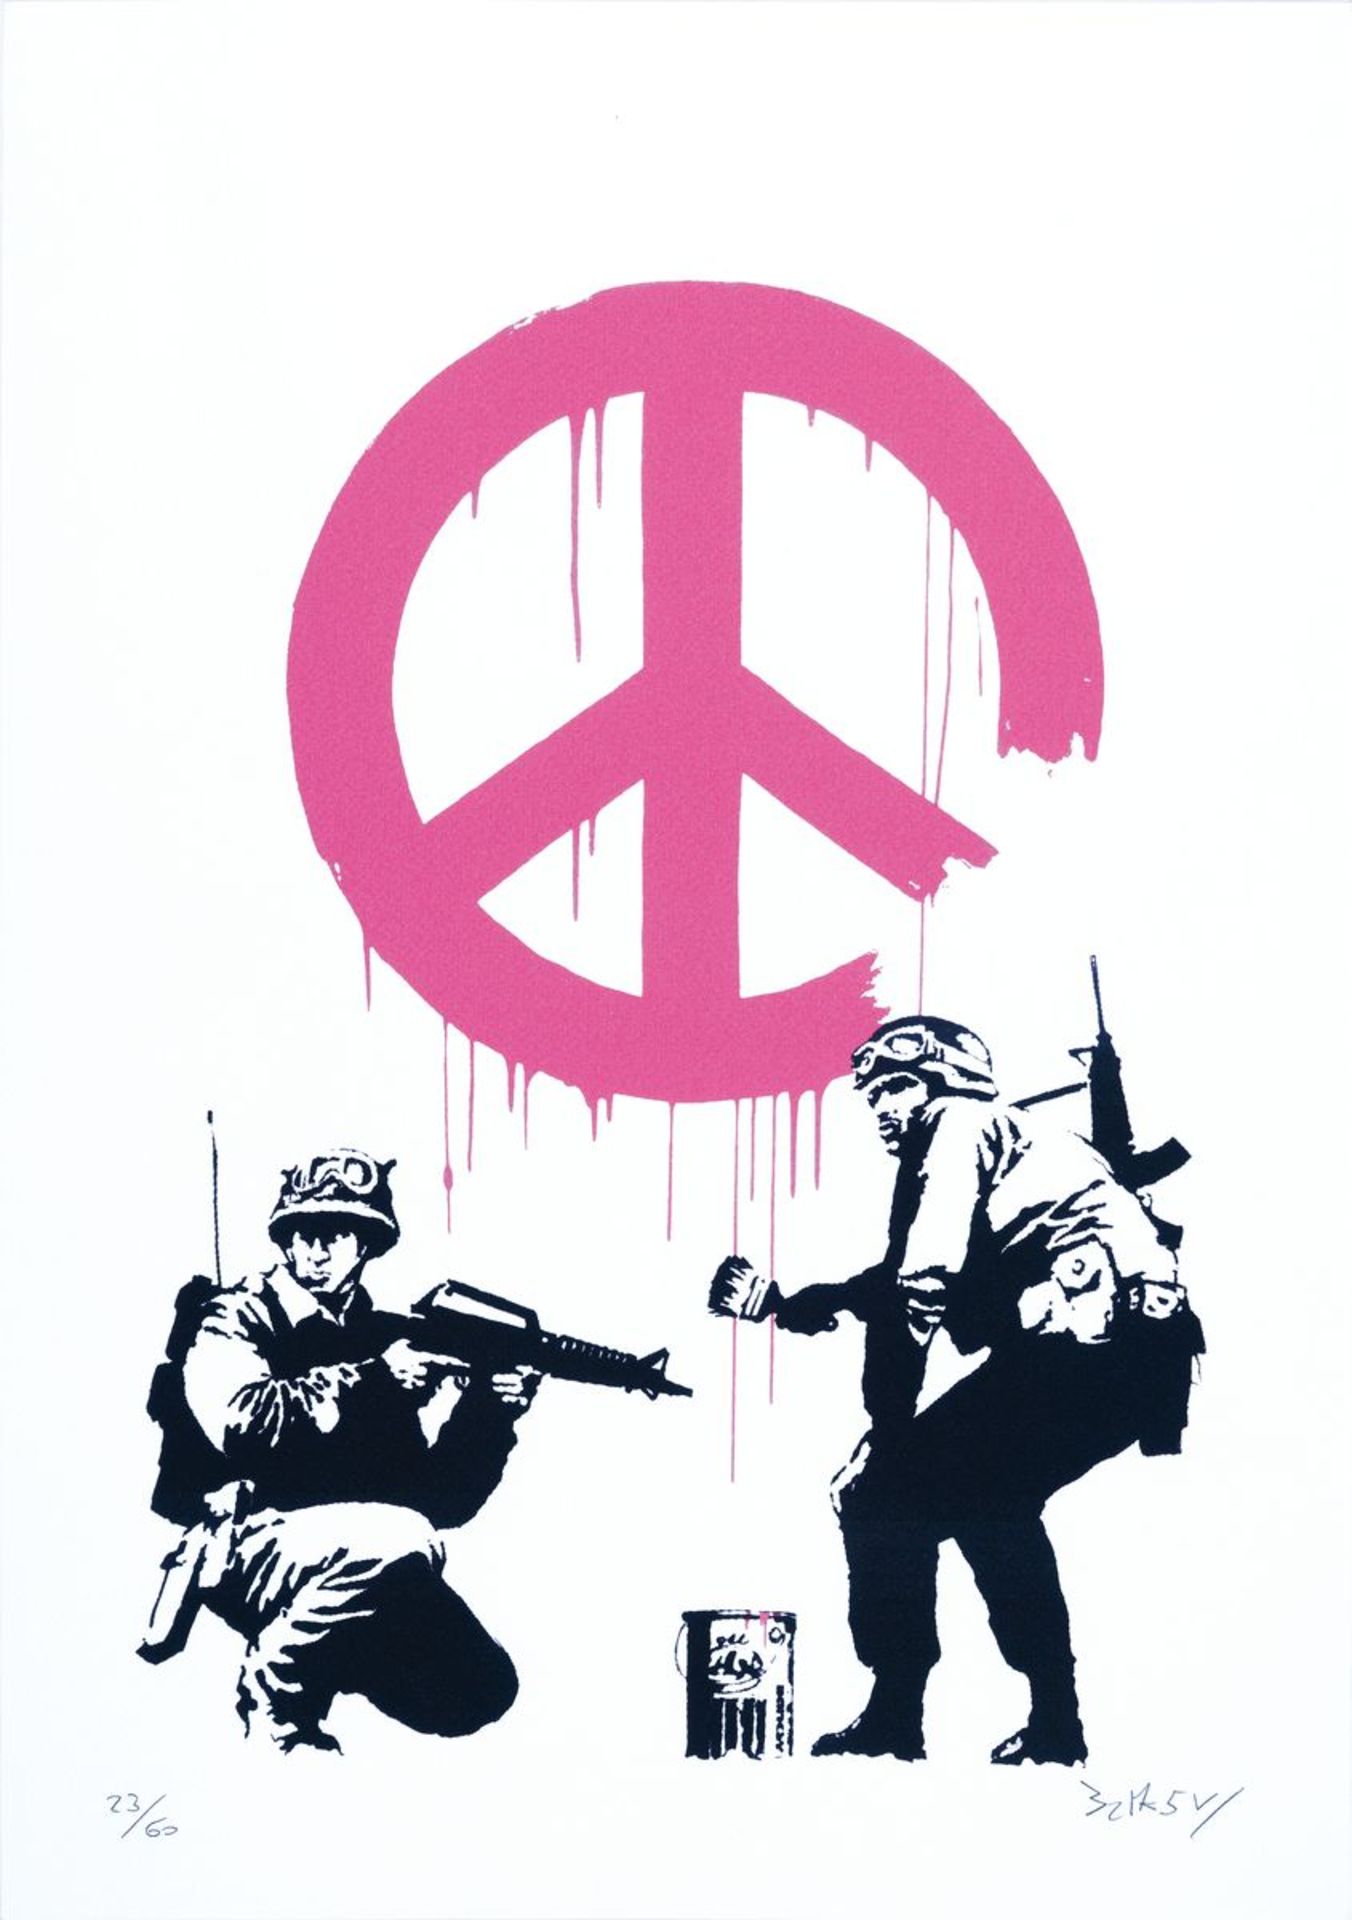 nach Banksy, CND Soldiers, Campaign for NuclDisarmament,